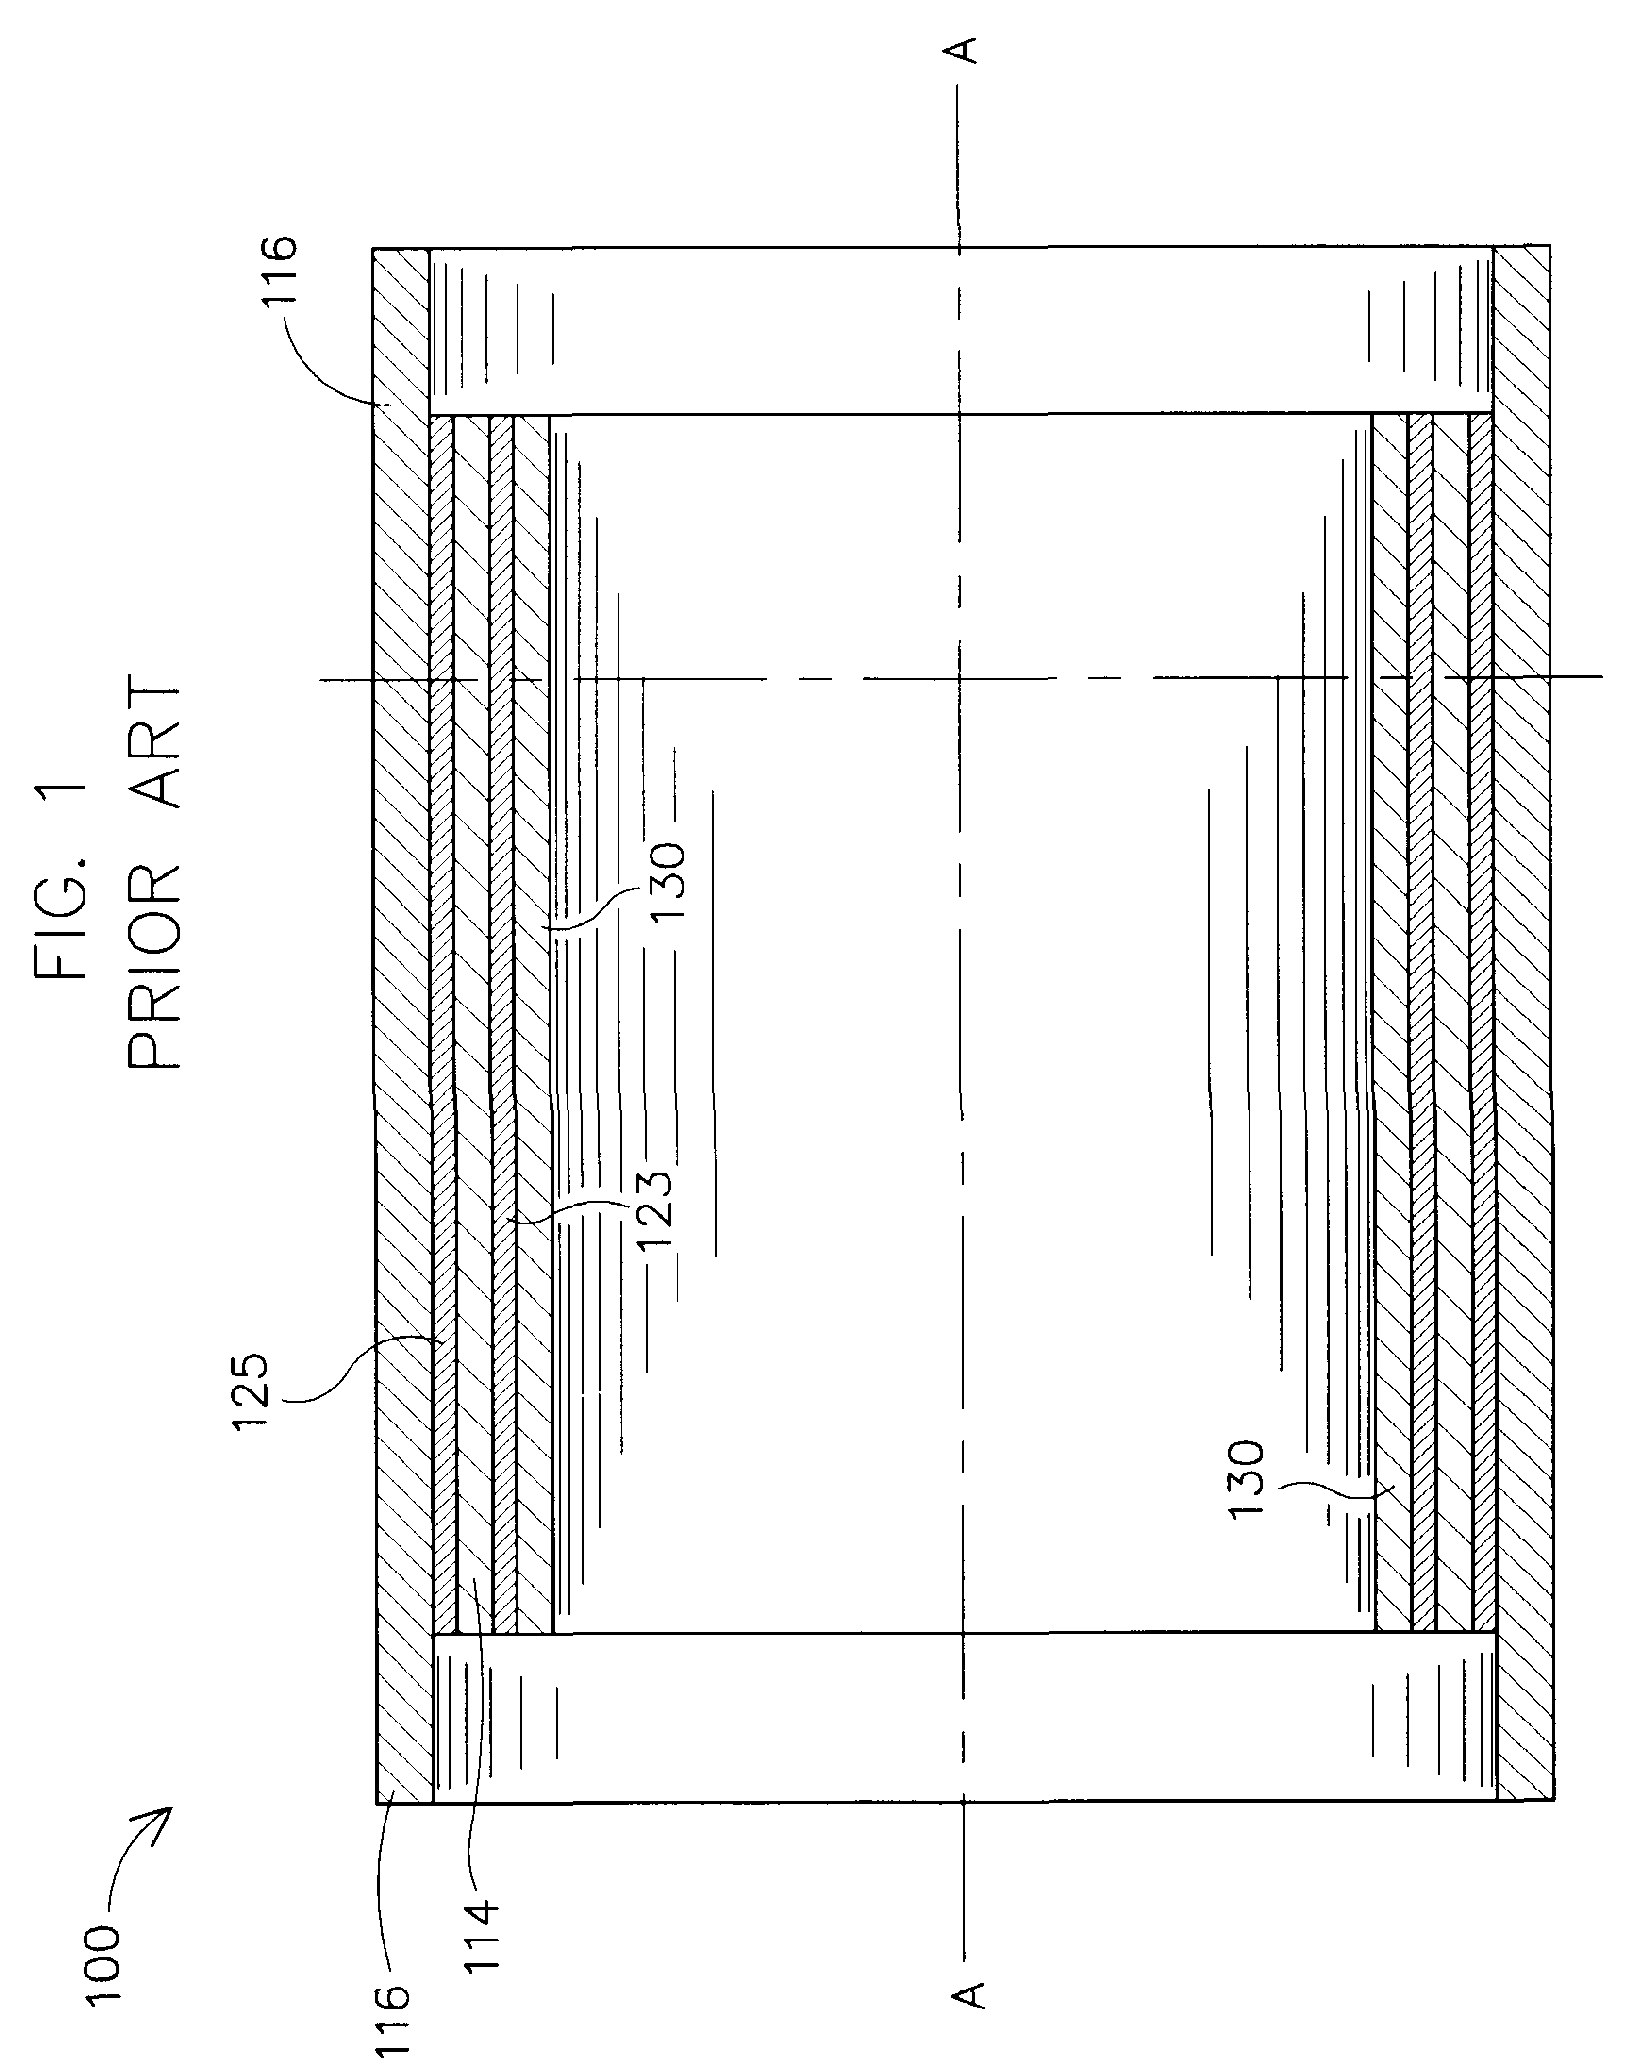 Apparatus for active cooling of an MRI patient bore in cylindrical MRI systems